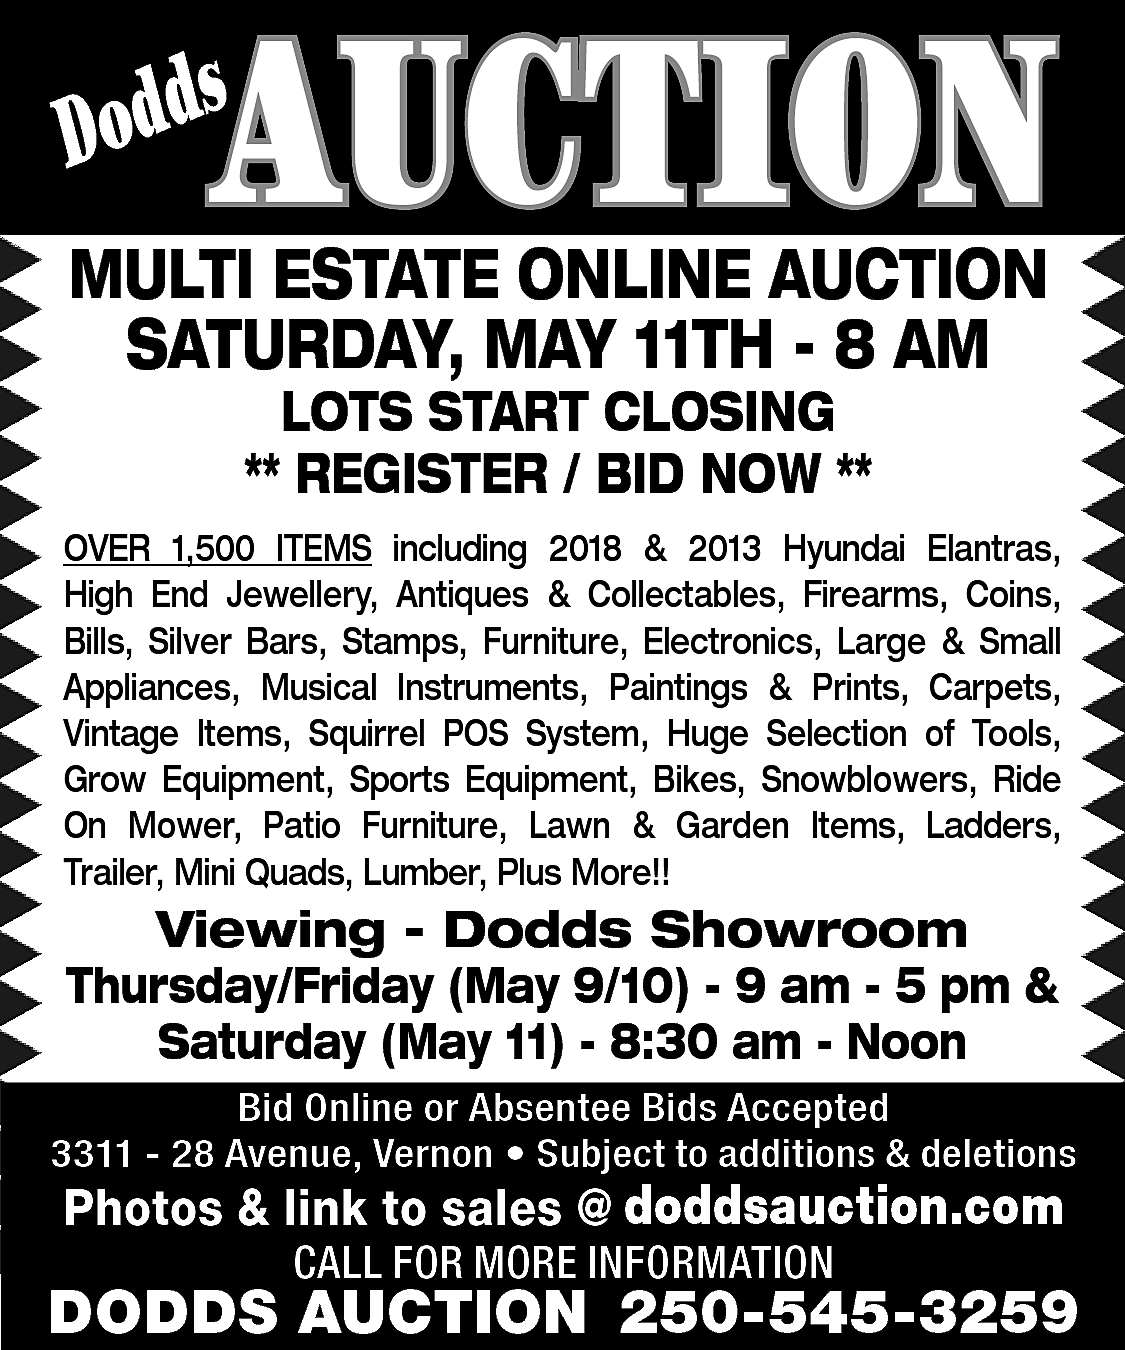 AUCTION <br> <br>s <br>Dodd <br>  AUCTION    s  Dodd    MULTI ESTATE ONLINE AUCTION  SATURDAY, MAY 11TH - 8 AM  LOTS START CLOSING  ** REGISTER / BID NOW **    OVER 1,500 ITEMS including 2018 & 2013 Hyundai Elantras,  High End Jewellery, Antiques & Collectables, Firearms, Coins,  Bills, Silver Bars, Stamps, Furniture, Electronics, Large & Small  Appliances, Musical Instruments, Paintings & Prints, Carpets,  Vintage Items, Squirrel POS System, Huge Selection of Tools,  Grow Equipment, Sports Equipment, Bikes, Snowblowers, Ride  On Mower, Patio Furniture, Lawn & Garden Items, Ladders,  Trailer, Mini Quads, Lumber, Plus More!!    Viewing - Dodds Showroom  Thursday/Friday (May 9/10) - 9 am - 5 pm &  Saturday (May 11) - 8:30 am - Noon  Bid Online or Absentee Bids Accepted  3311 - 28 Avenue, Vernon • Subject to additions & deletions    www.doddsauction.com  Photos & link to sales @  doddsauction.com  CALL FOR MORE INFORMATION    DODDS AUCTION 250-545-3259    